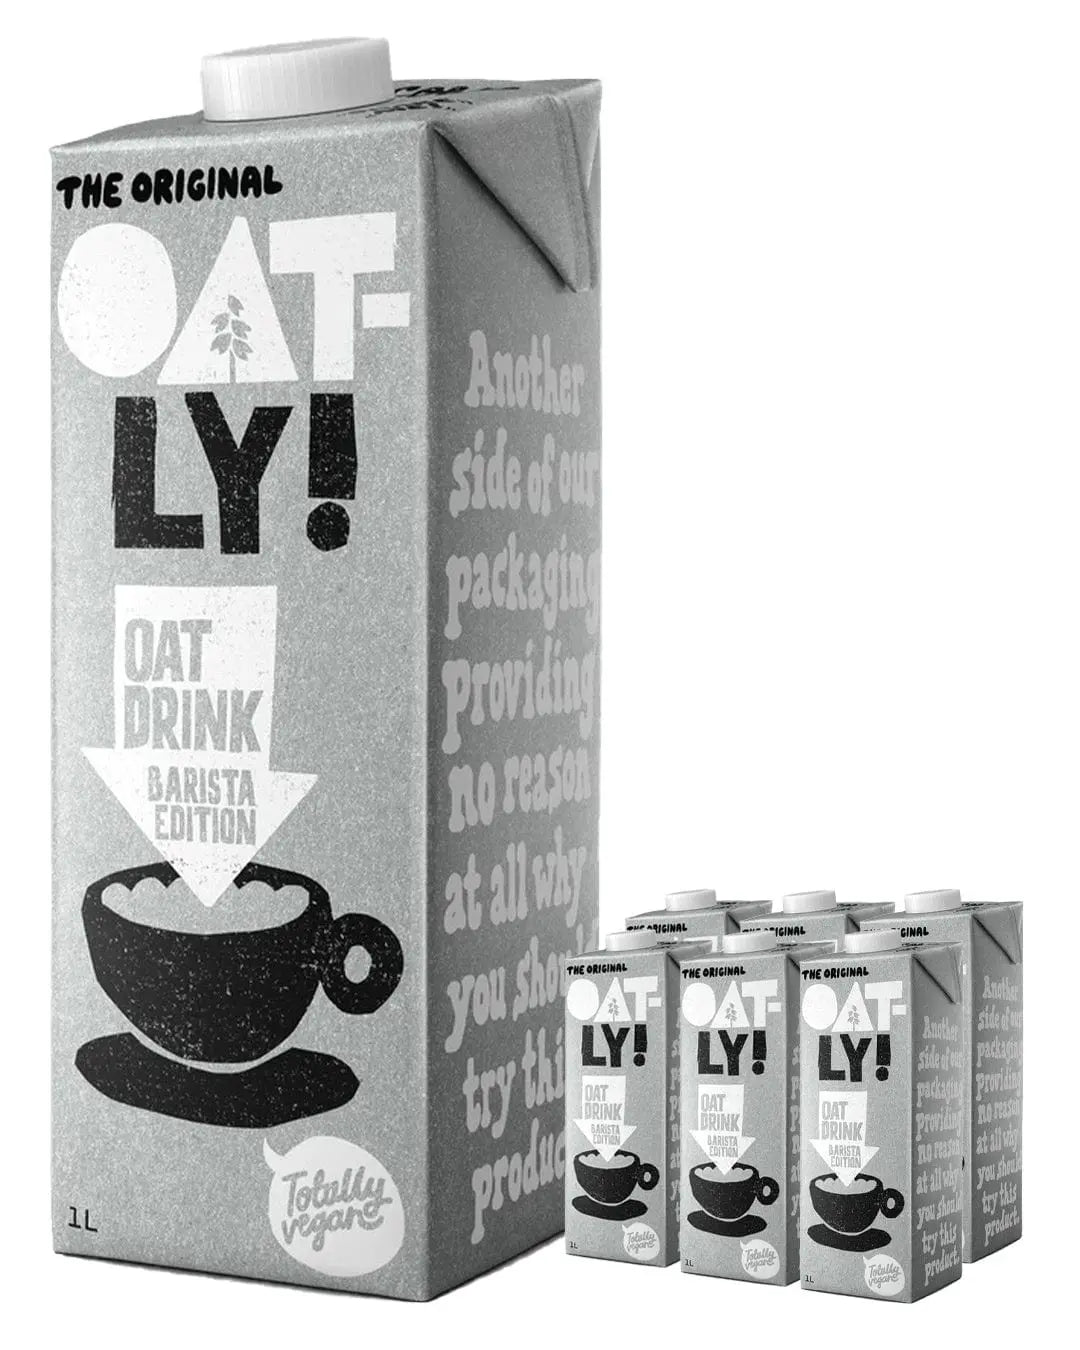 Have the OATLY! Oat Drink, 6-pack 1l from Oatly delivered